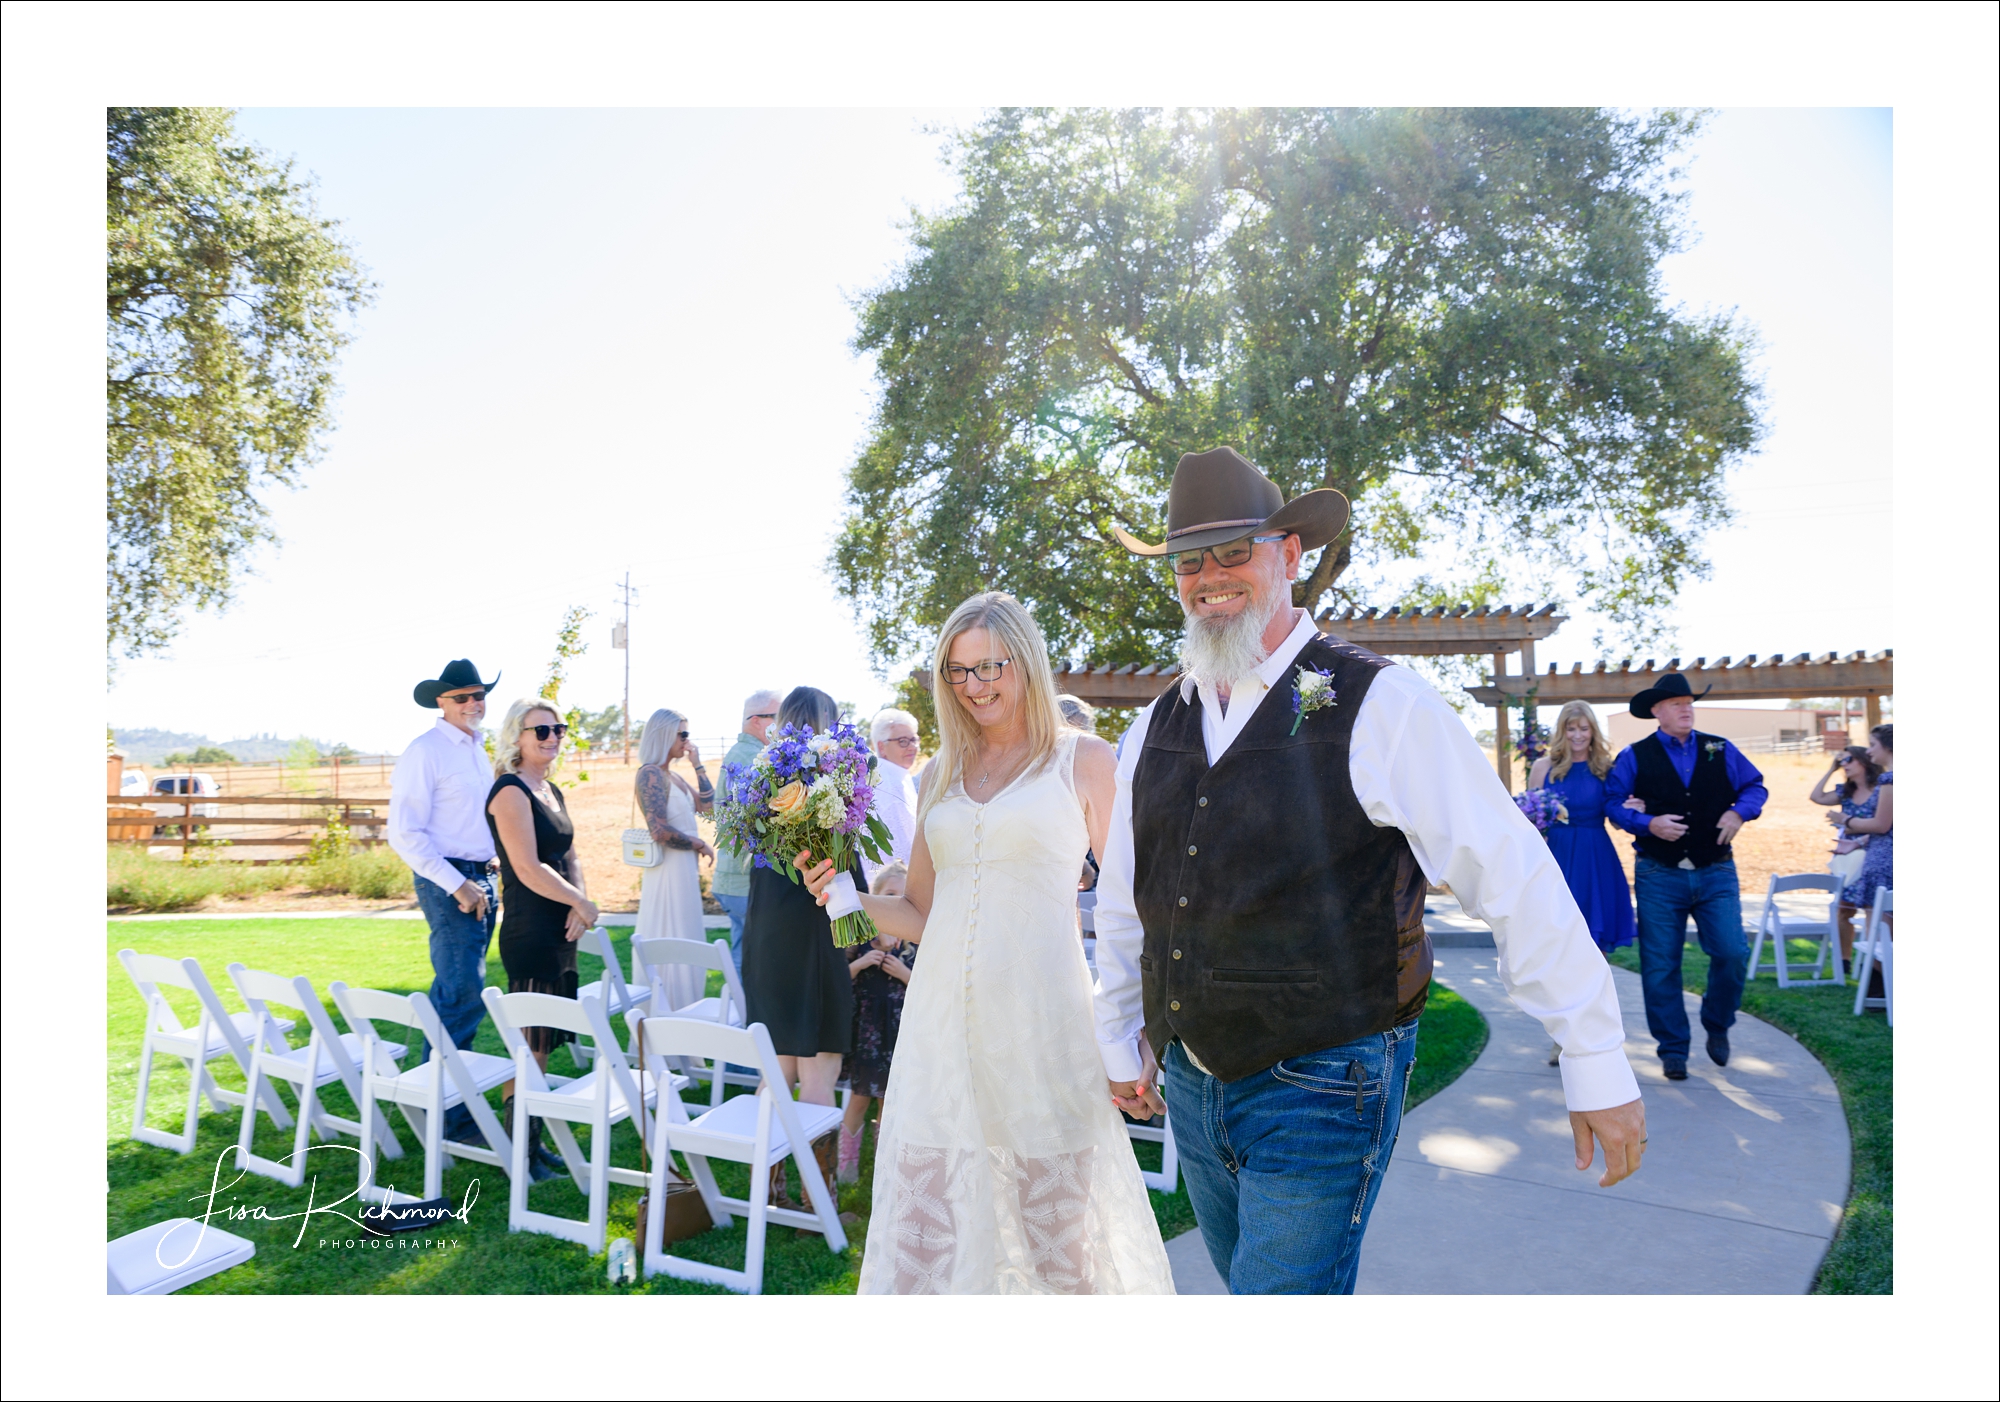 Pam and Dave- Married at the Bayley Barn